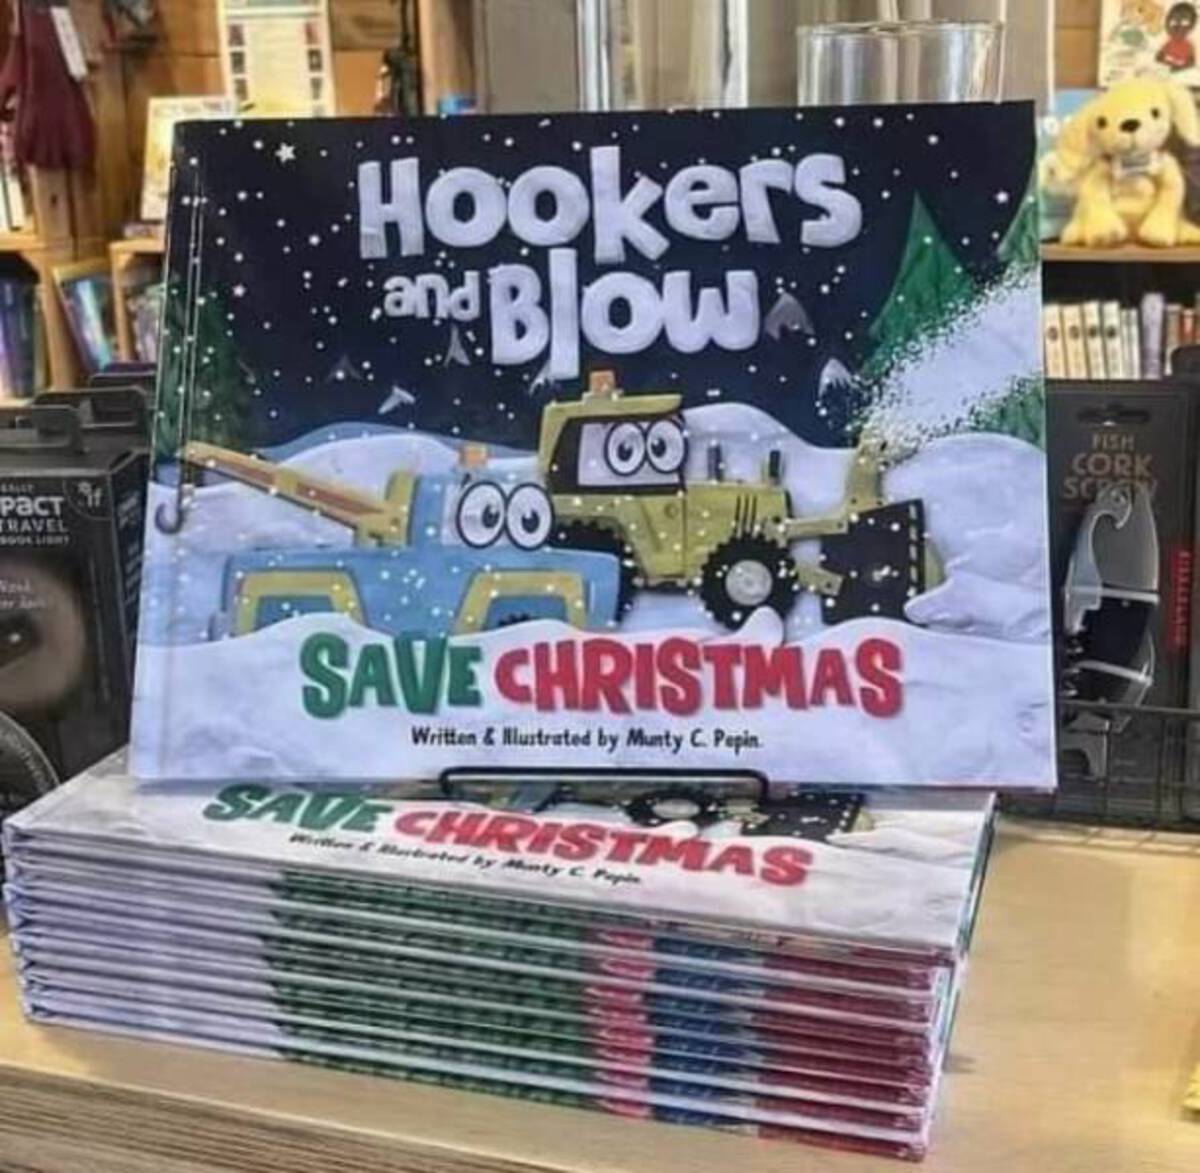 hookers and blow save christmas - Anat Travel Hookers and Bow Oott Toome! Of Save Christmas Written & Allustrated by Munty C. Pepin. Save Christmas Men&Matrated by ty CPeple Fish Cork Scoot